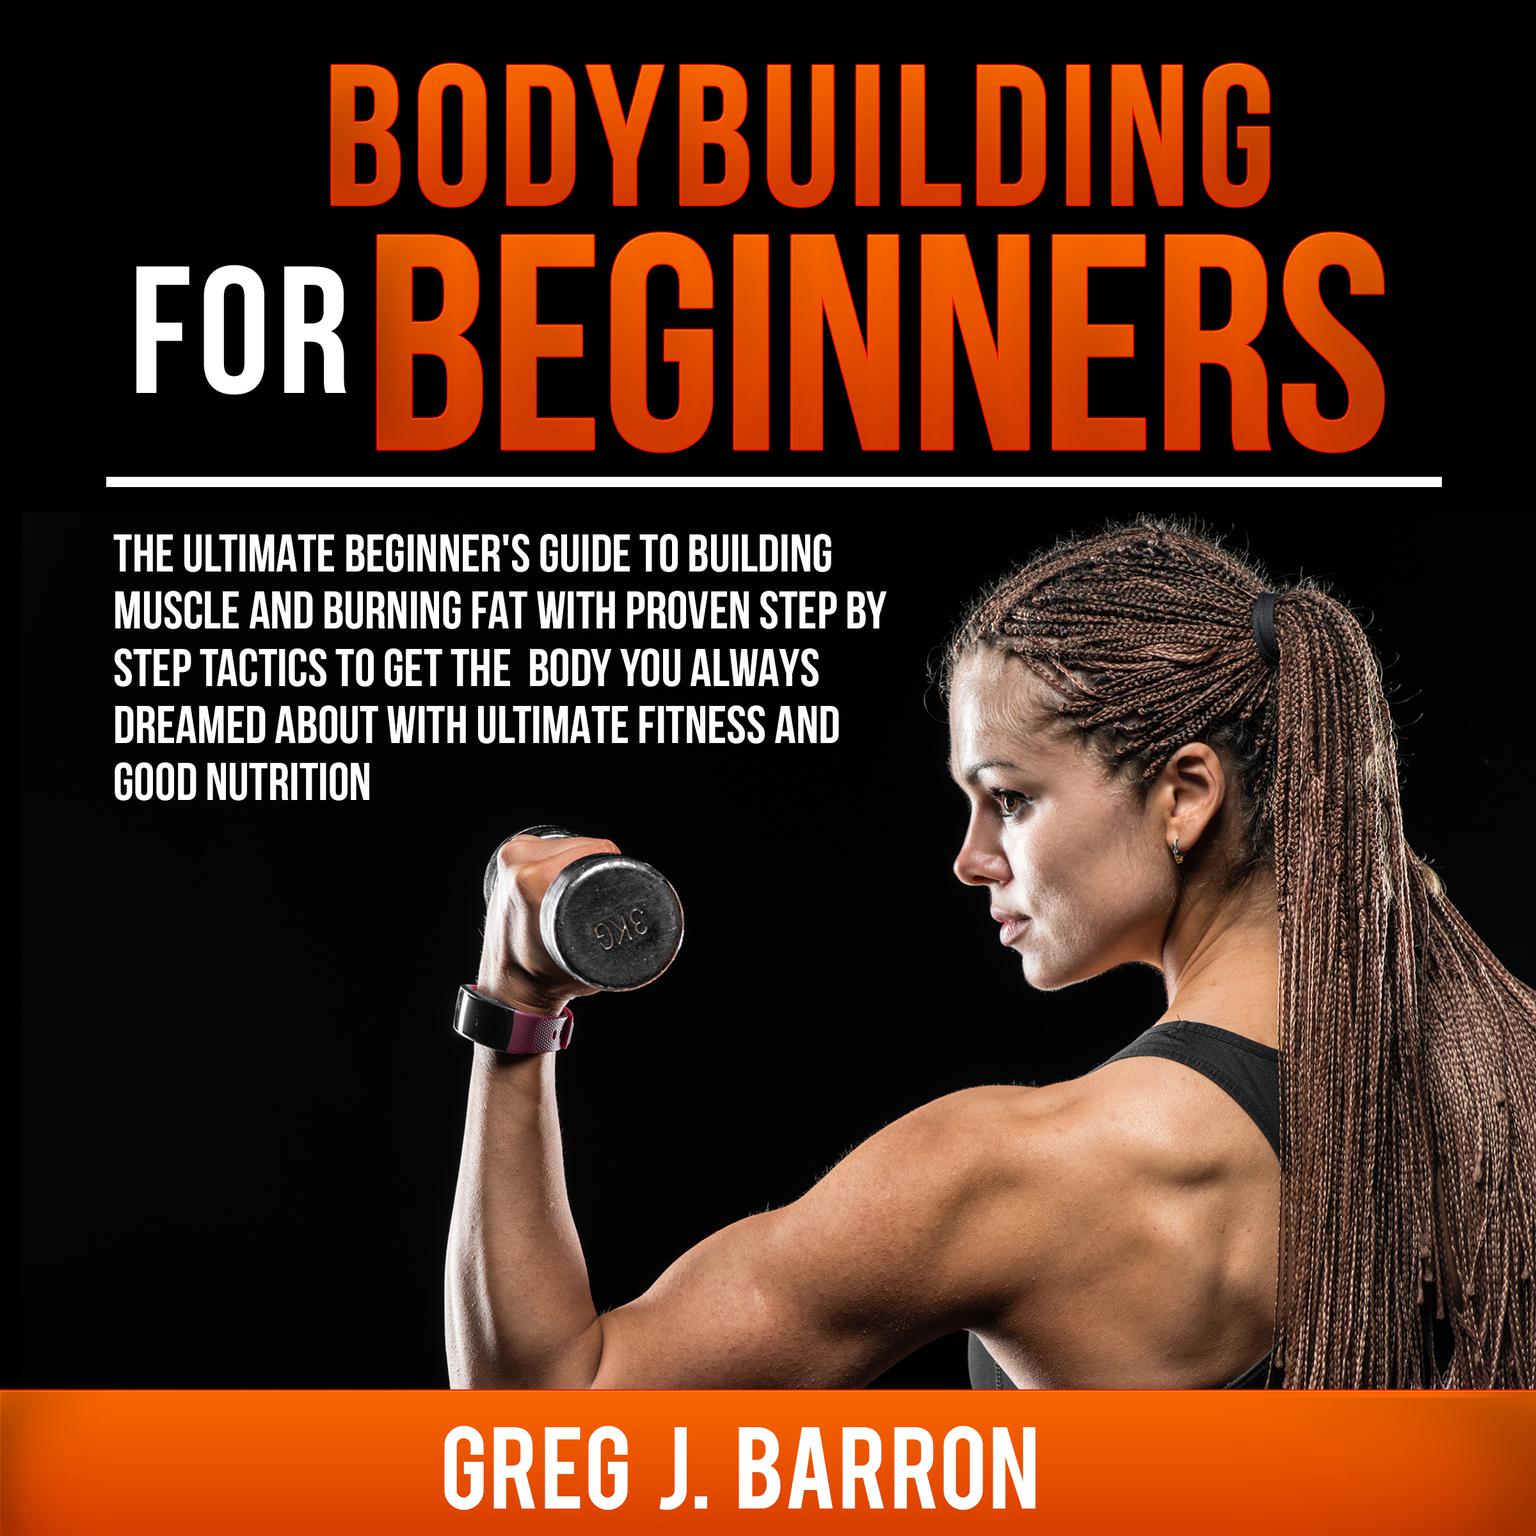 Bodybuilding for Beginners: The Ultimate Beginner’s Guide to Building Muscle and Burning Fat with Proven Step by Step Tactics to Get the Body You Always Dreamed About with Ultimate Fitness and Good Nutrition Audiobook, by Greg J. Barron